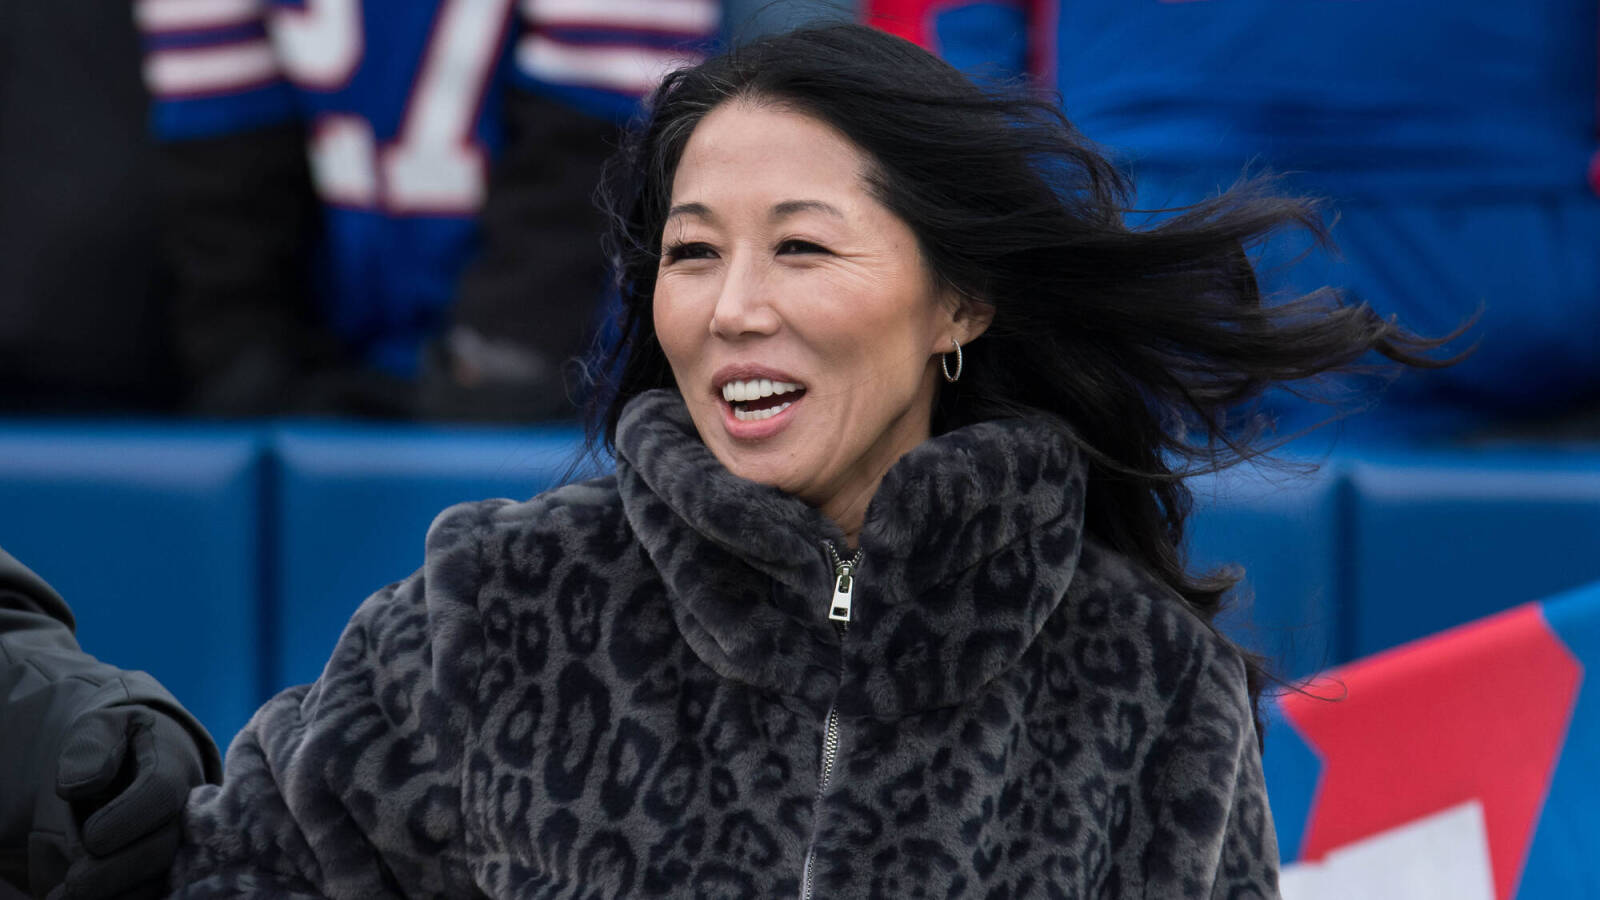 Bills, Sabres co-owner Kim Pegula undergoing treatment for undisclosed health issues